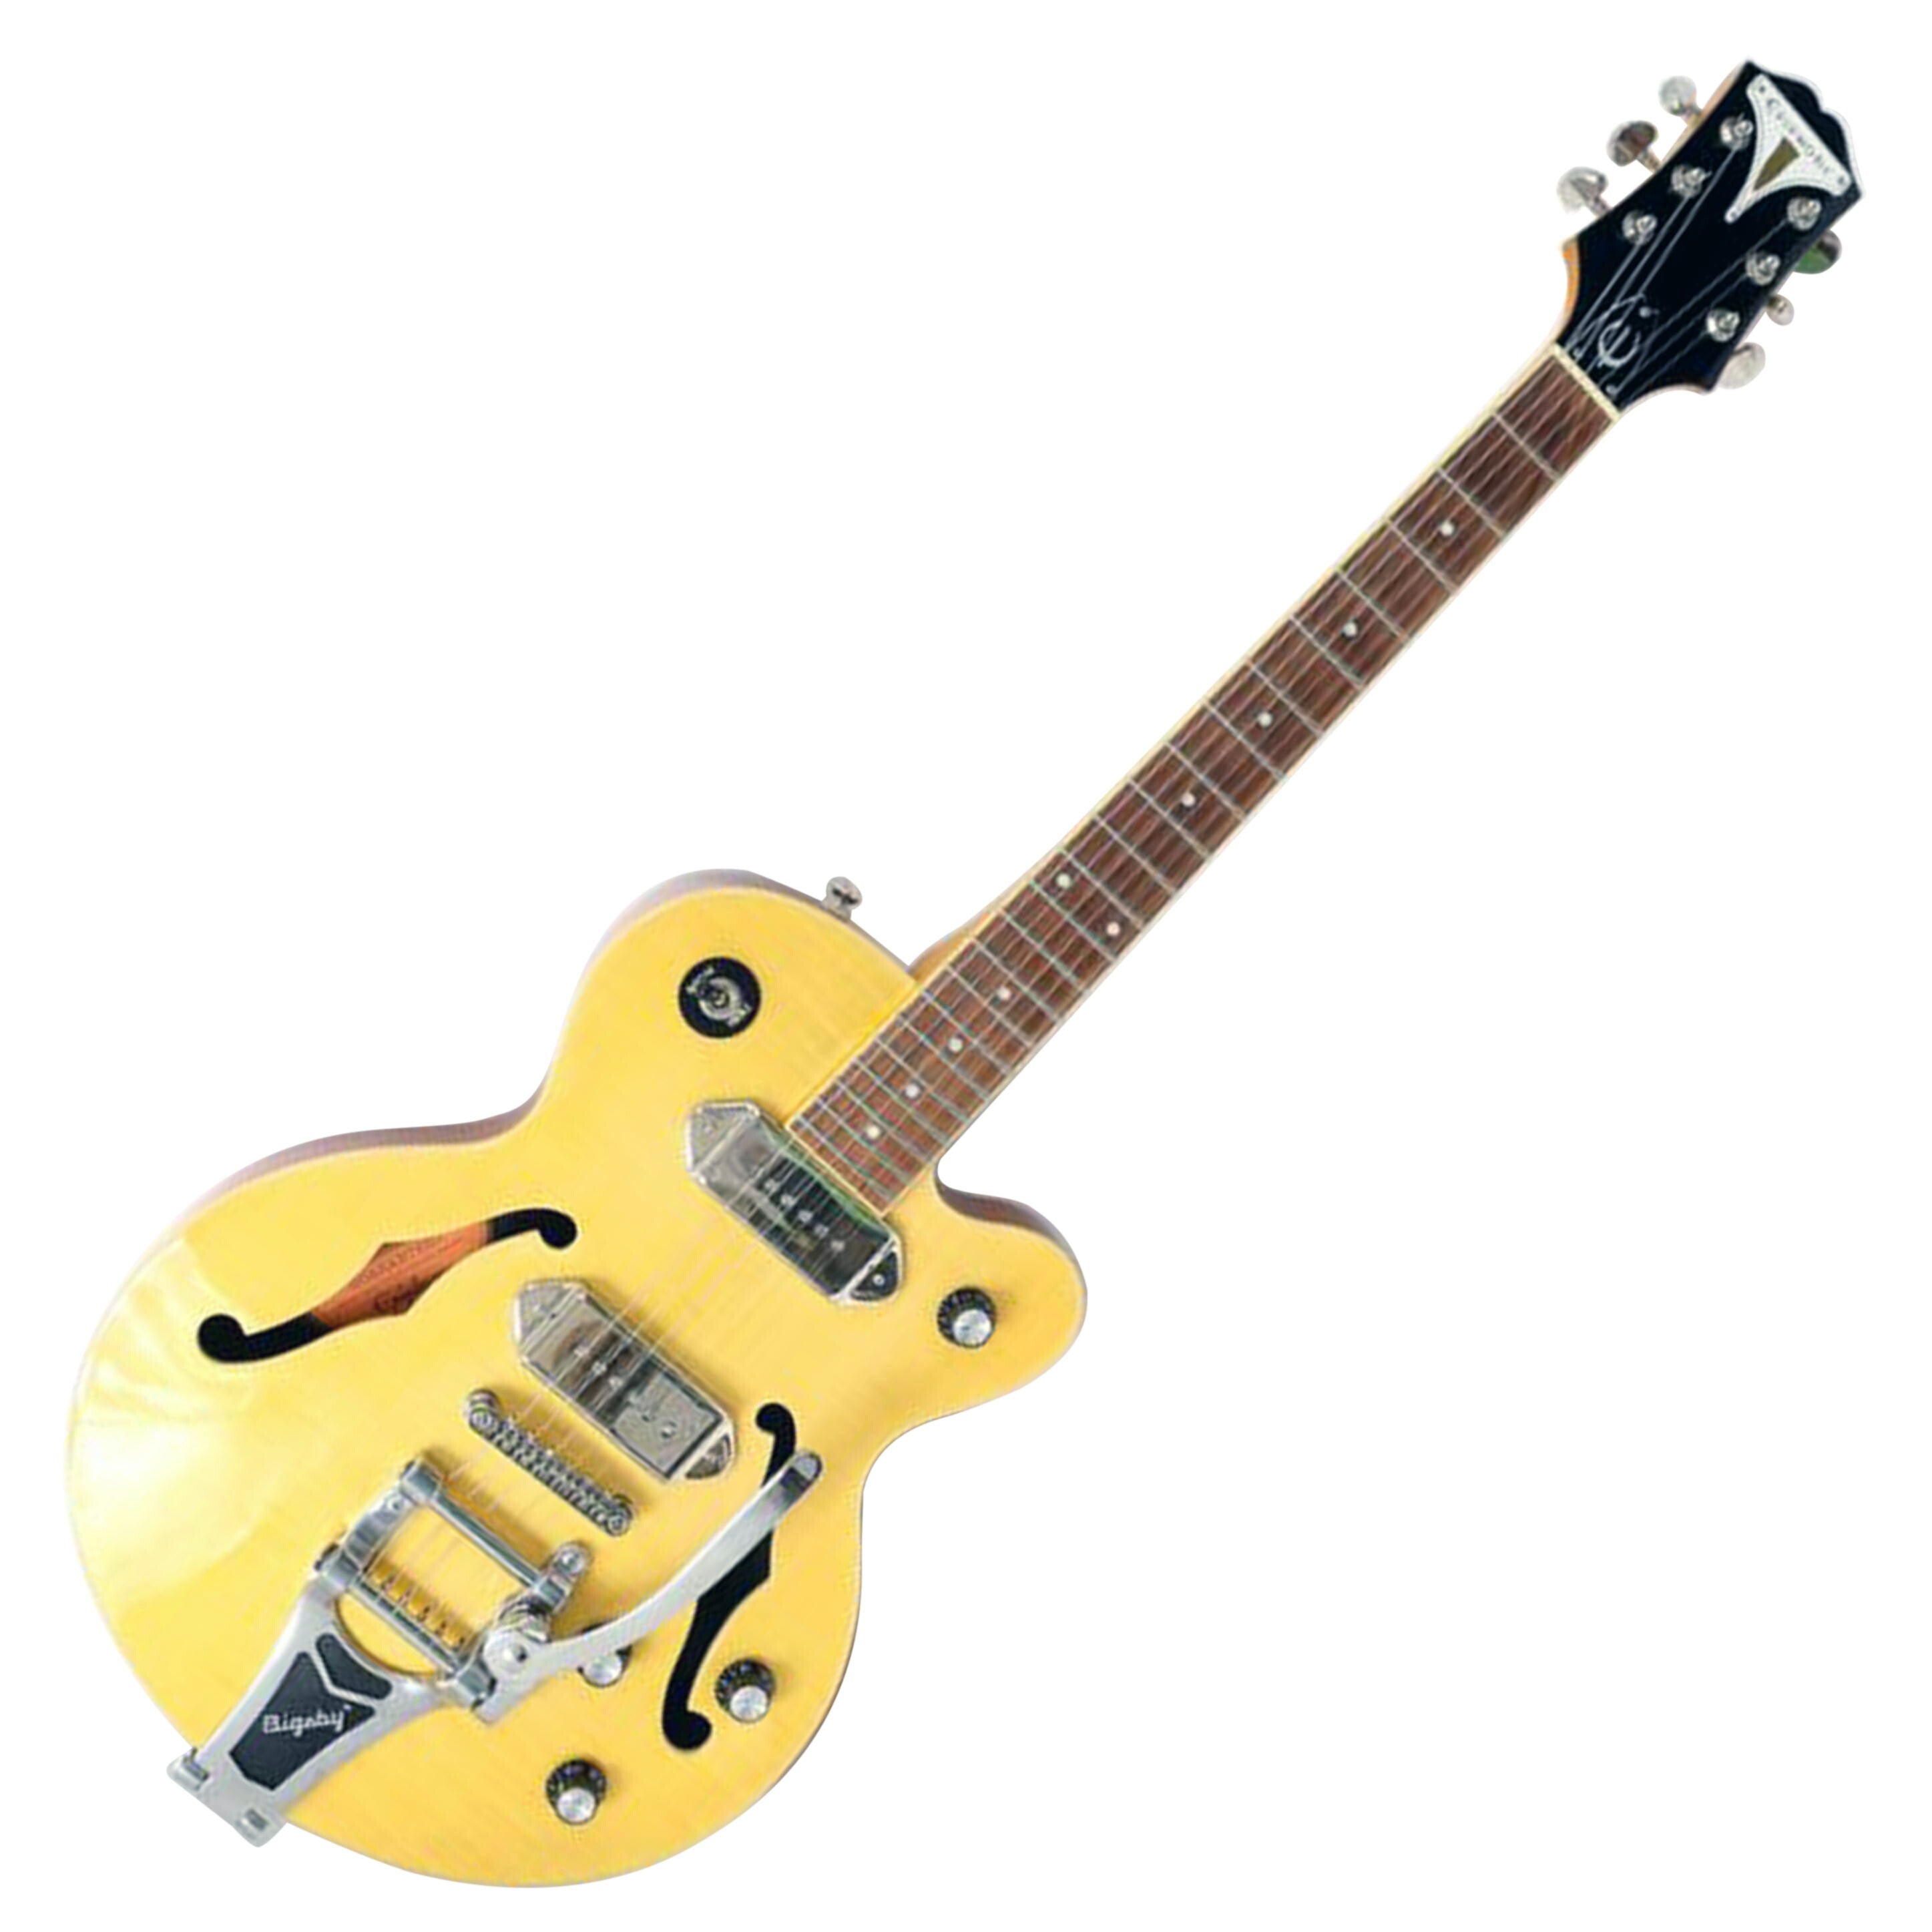 ＥＰＩＰＨＯＮＥ エピフォン/楽器｜REXT ONLINE 公式通販サイト